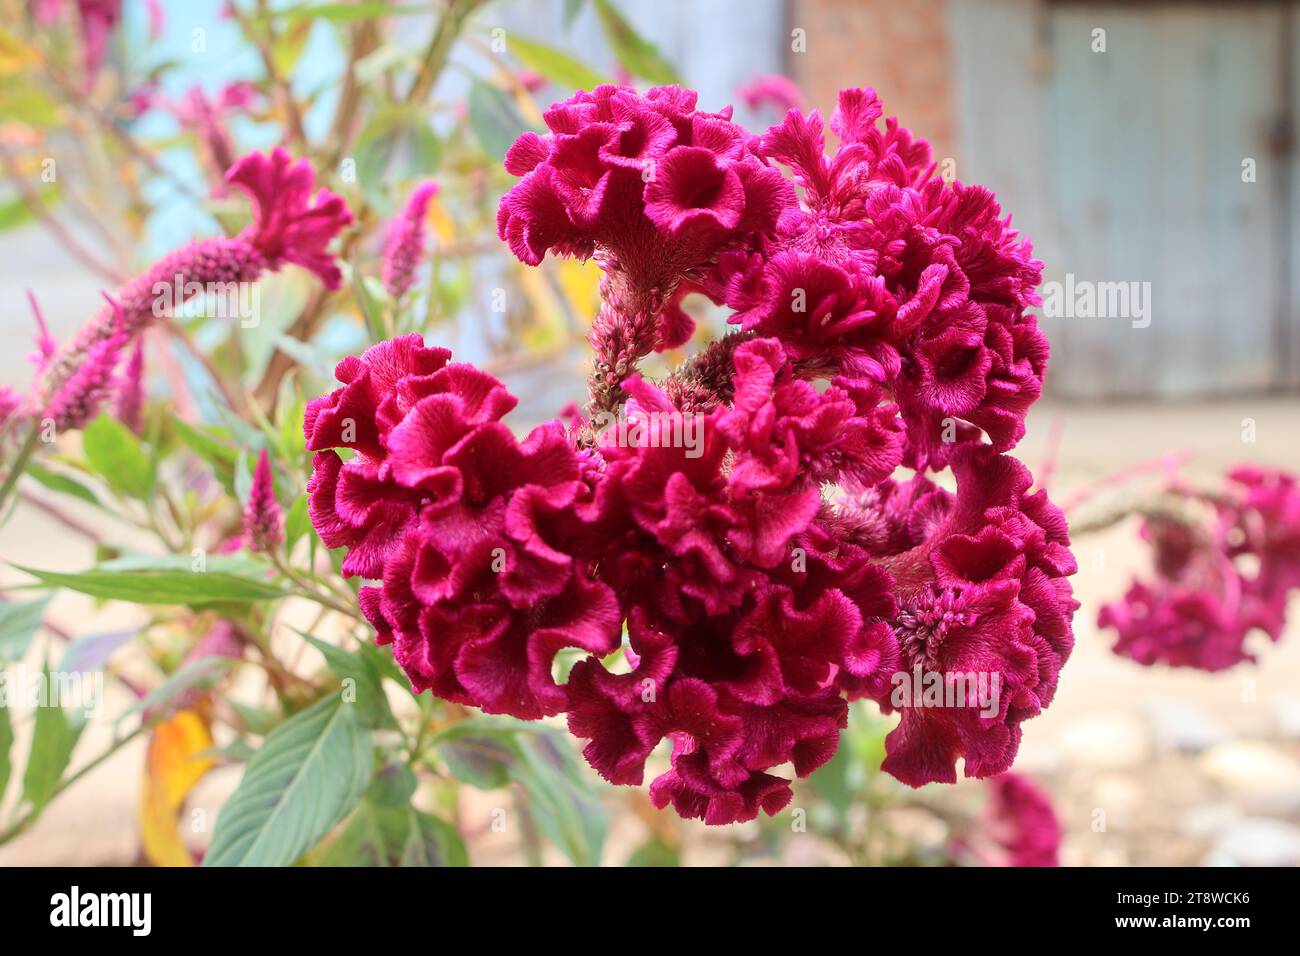 Celosia argentea var. cristata (formerly Celosia cristata), known as cockscomb, is the cristate or crested variety of the species Celosia argenteas Stock Photo